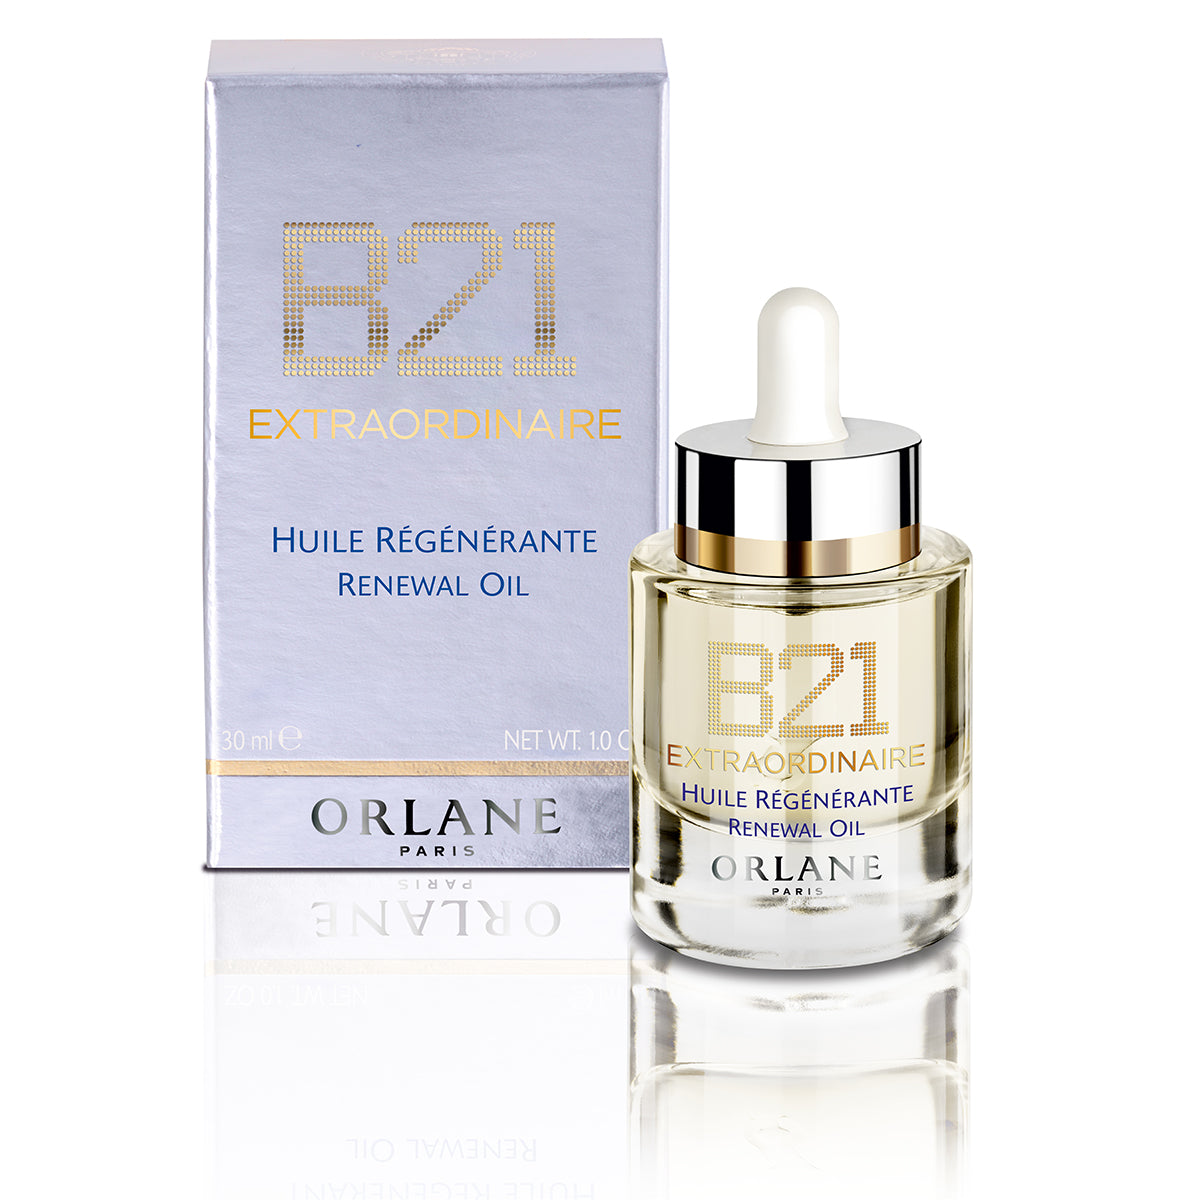 Orlane B21 Extraordinaire Renewal Oil - FREE Travel Kit with purchase!